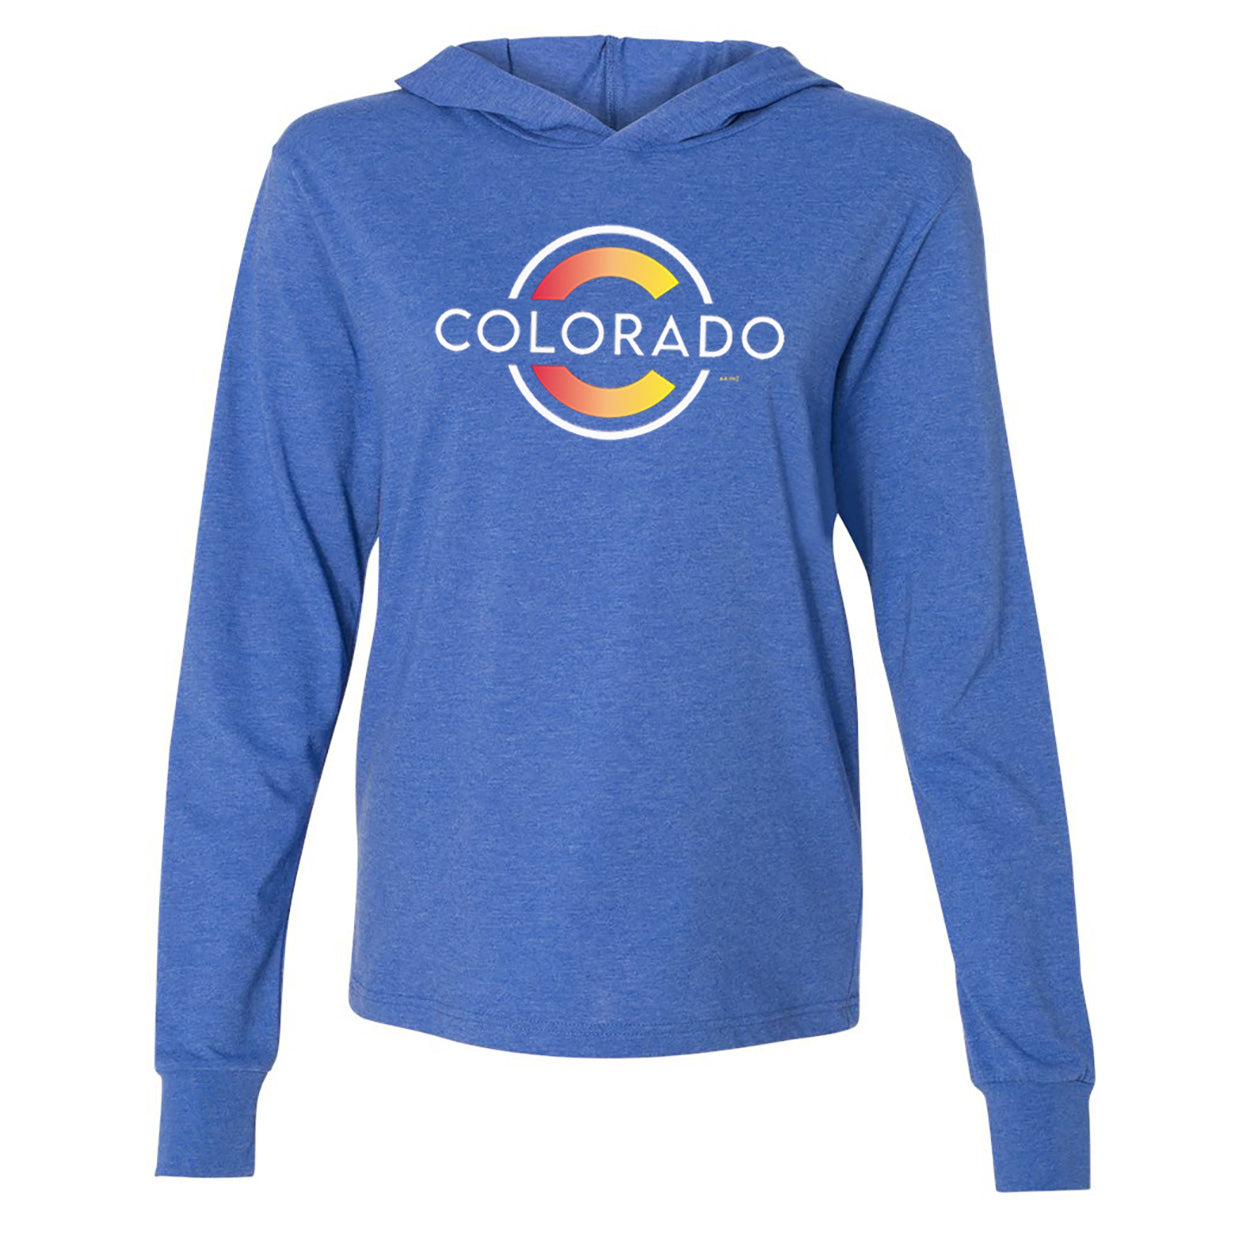 Classic Colorado Hooded Pullover